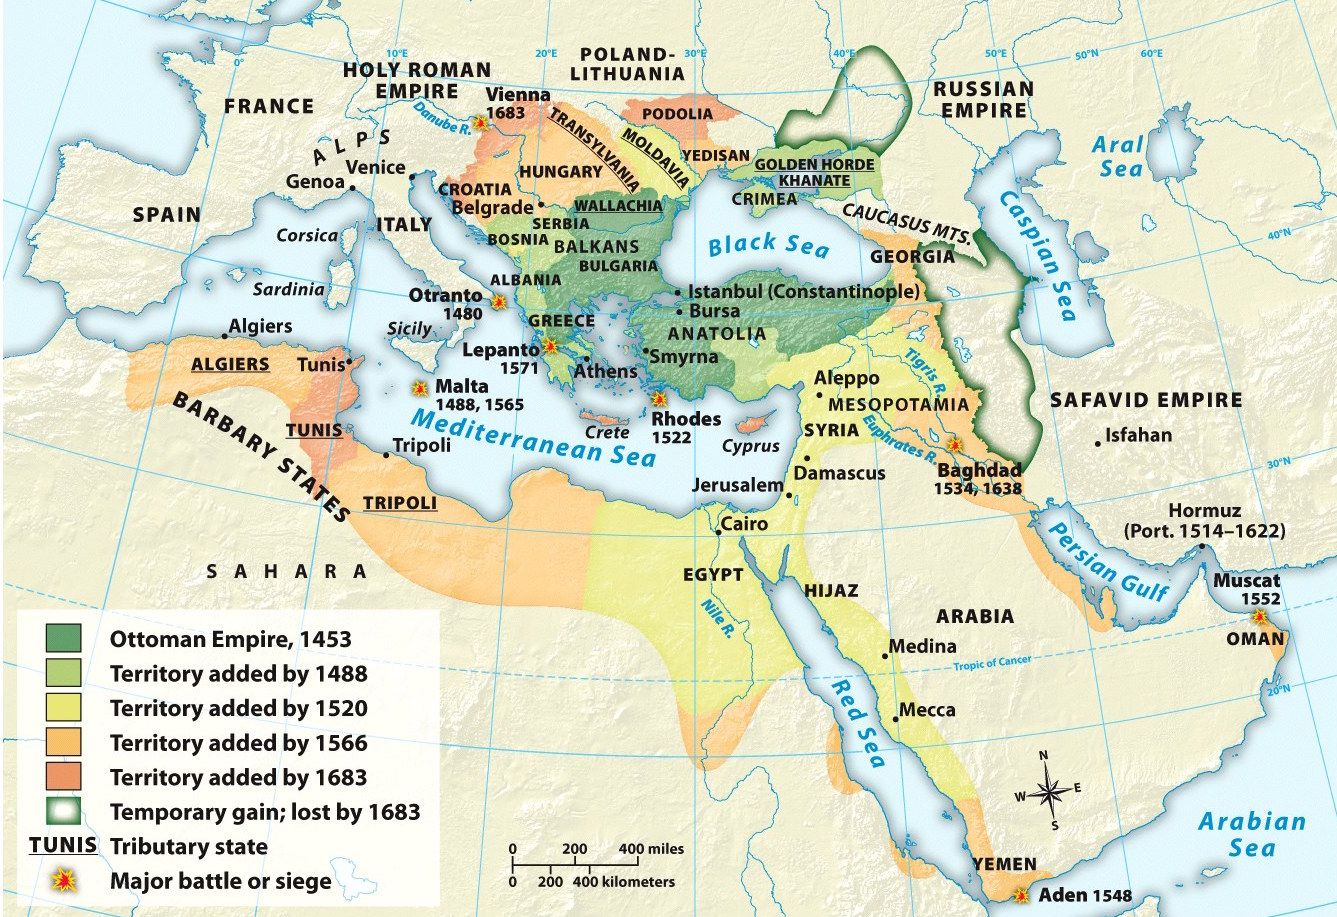 Online Maps Blog - The Ottoman Empire, 1300-1689. Expansion to